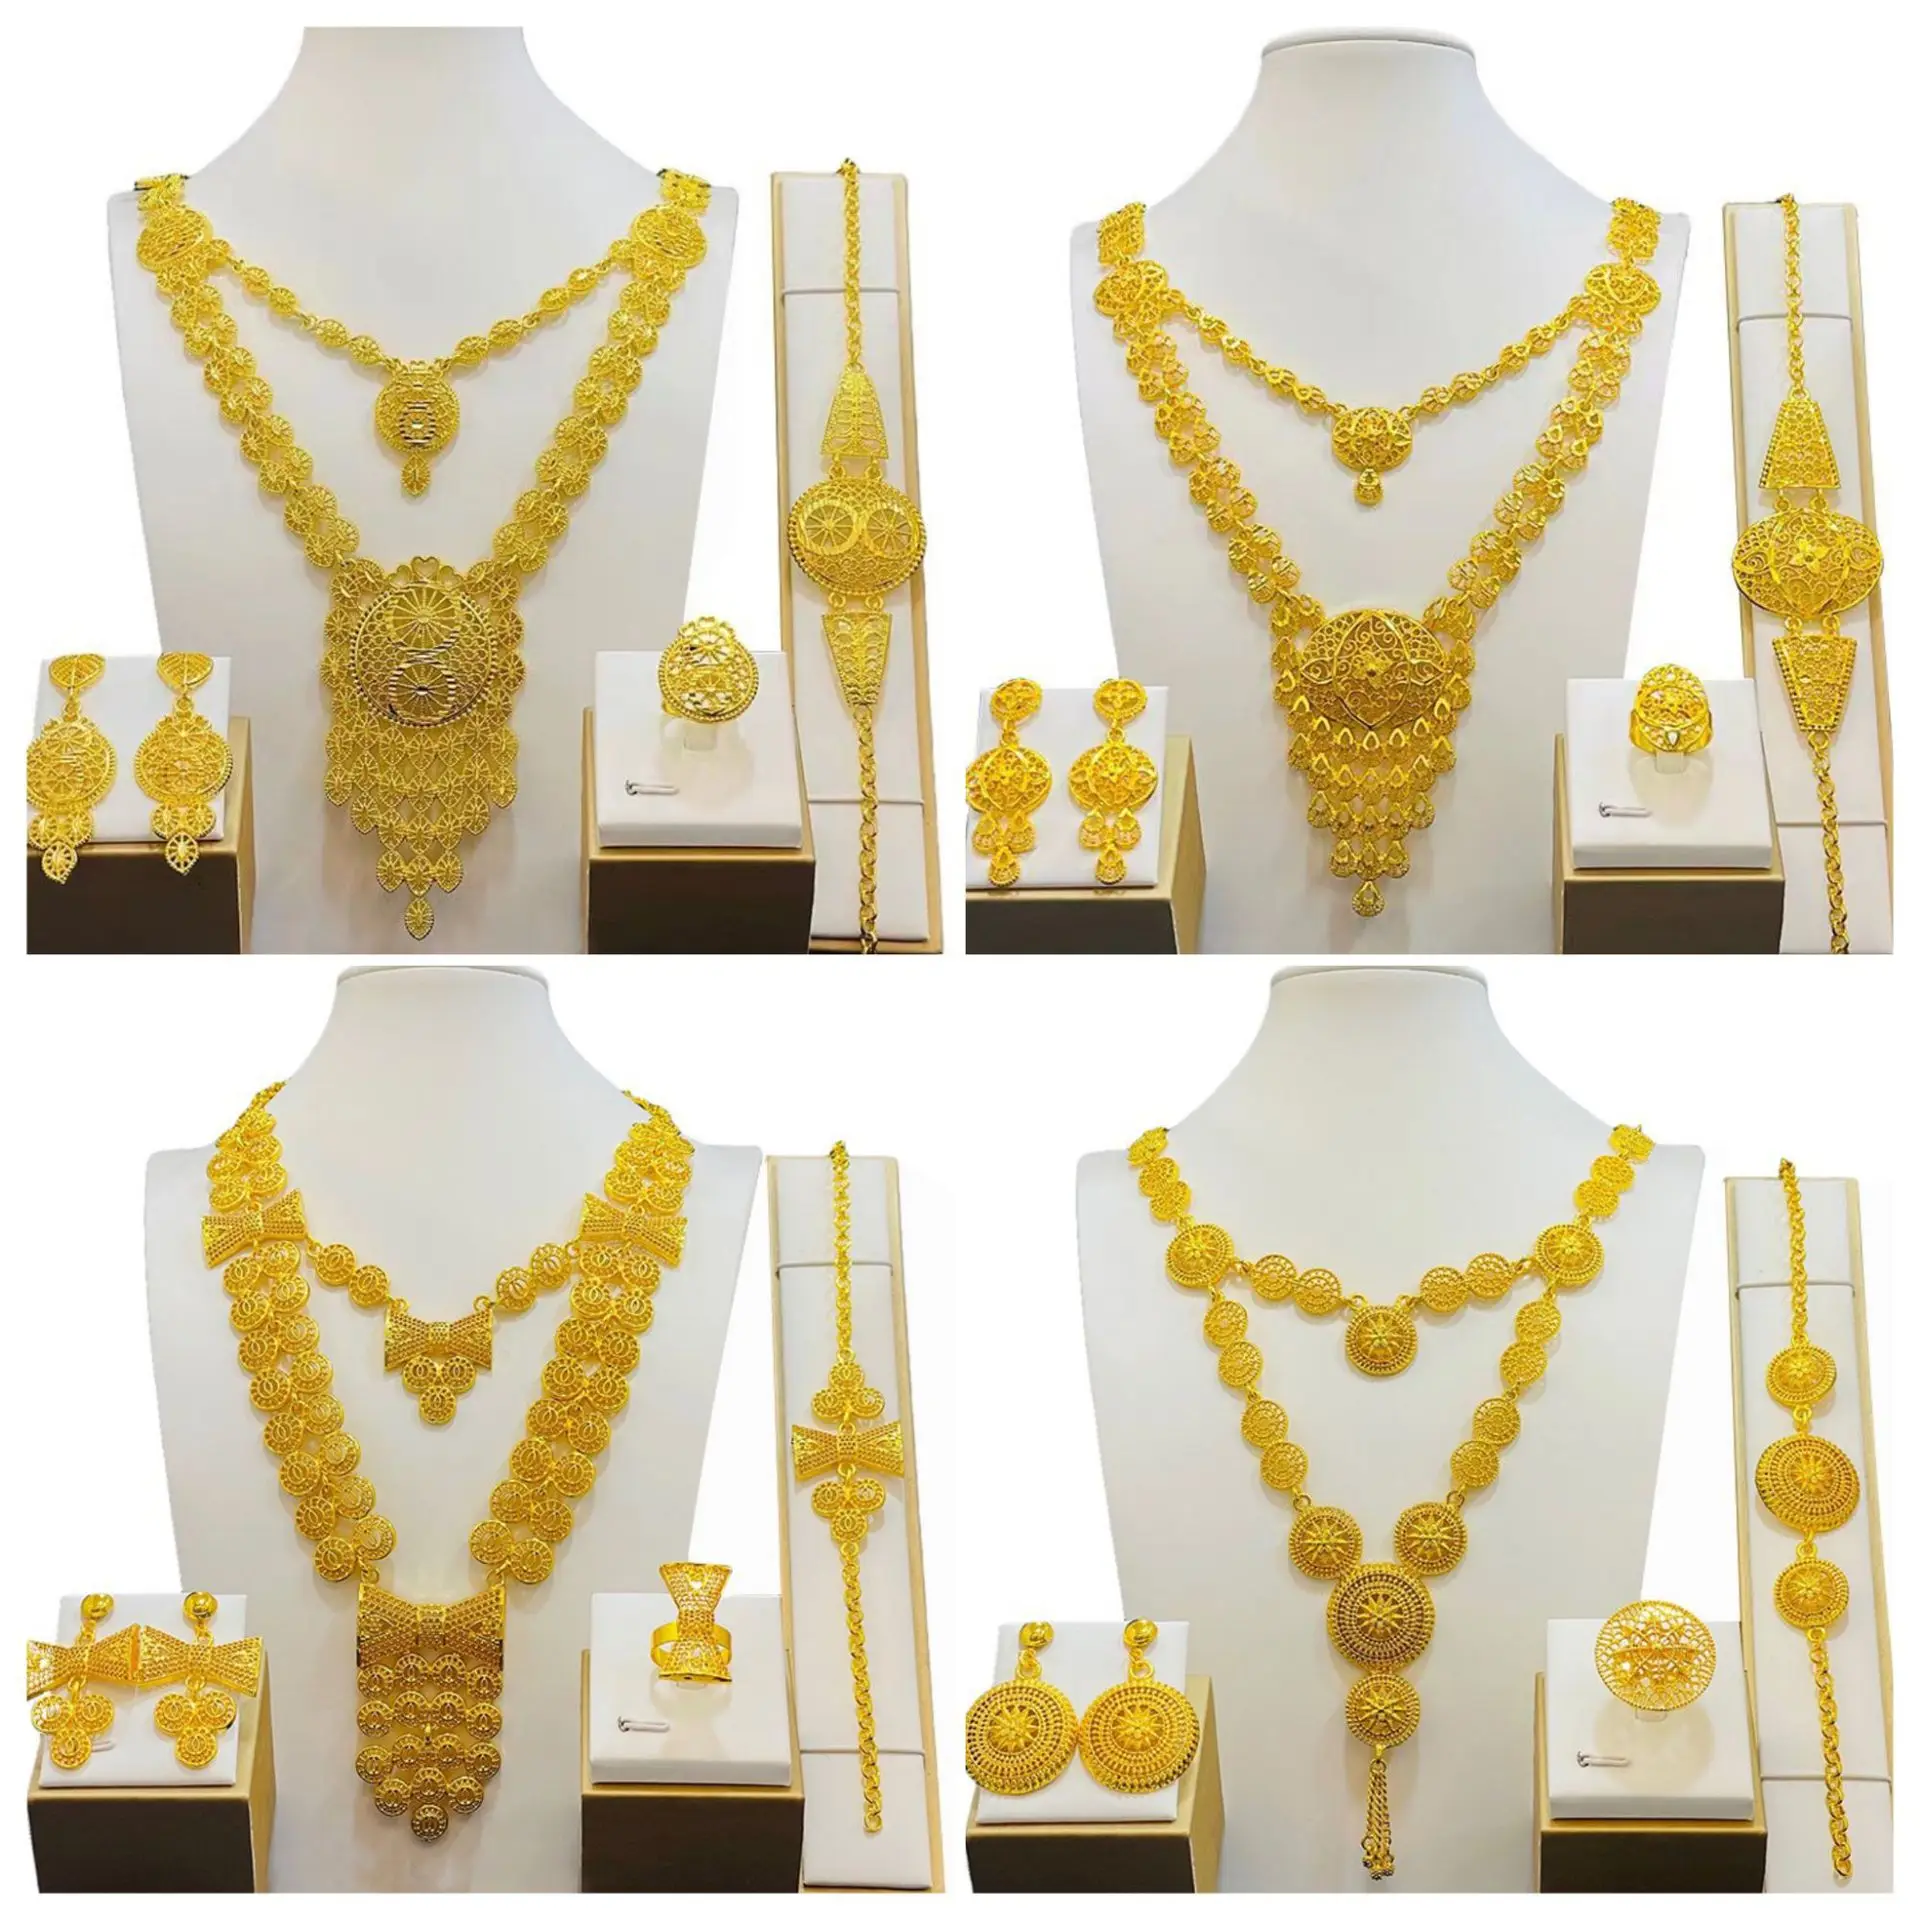 

African 24K Gold Plated Jewelry Sets Wedding Dubai Necklace Earrings For Women Nigerian Indian Bridal 4PCS Set Party Gifts